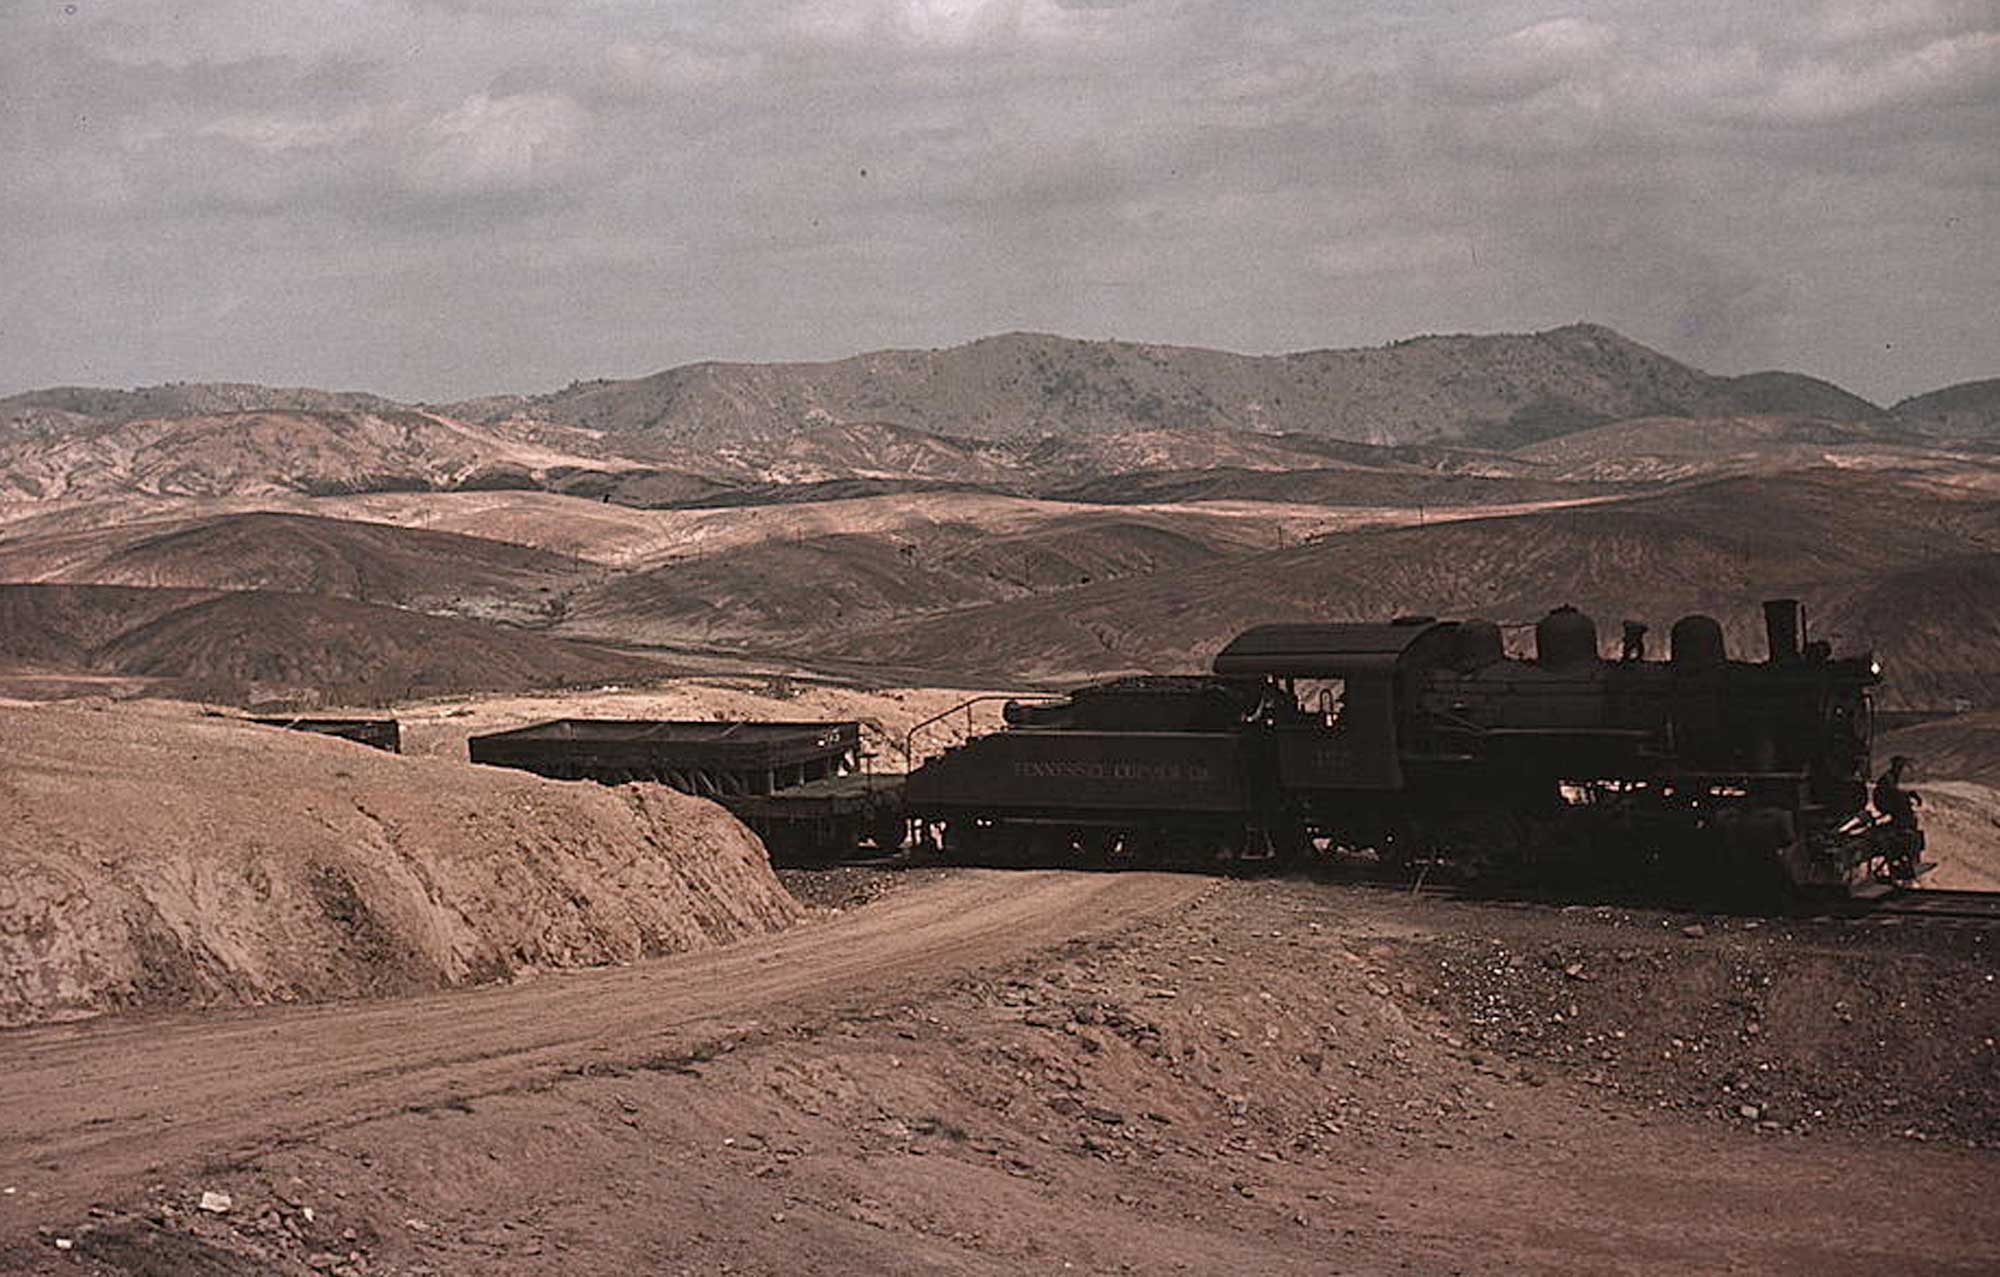 Photograph of a train hauling copper ore out of a mine in Ducktown, Tennessee.